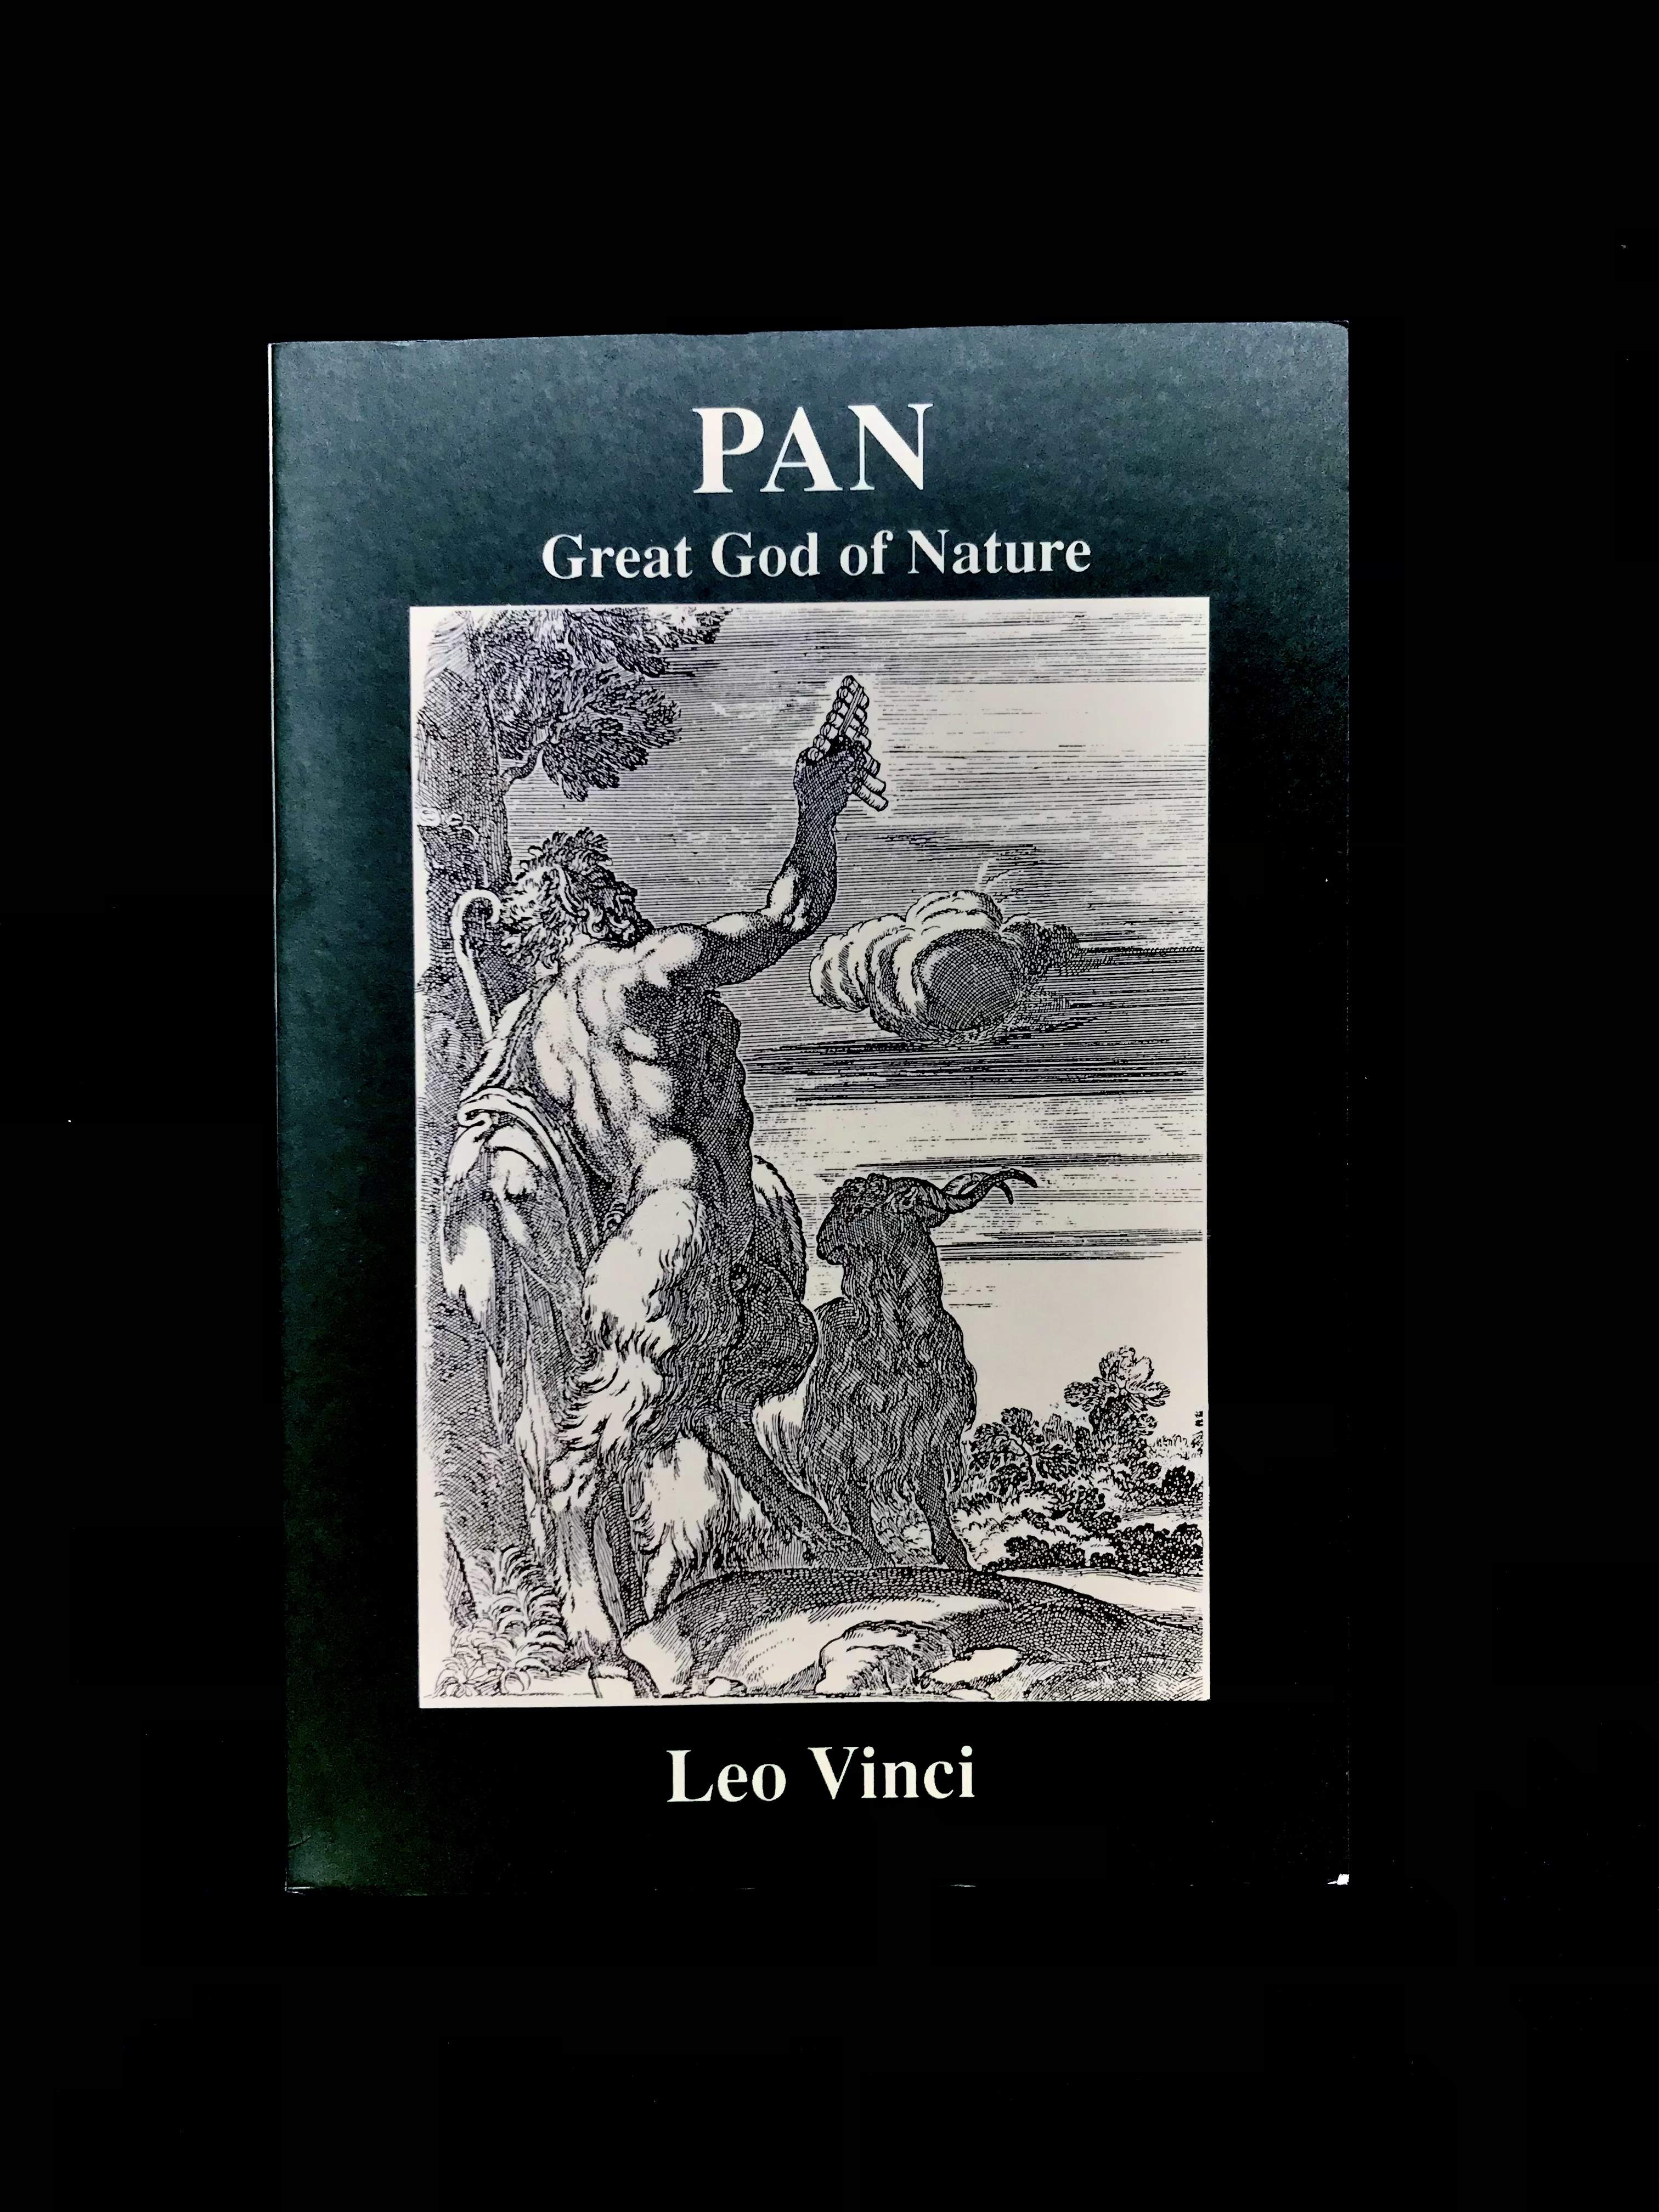 Pan: Great God of Nature by Leo Vinci